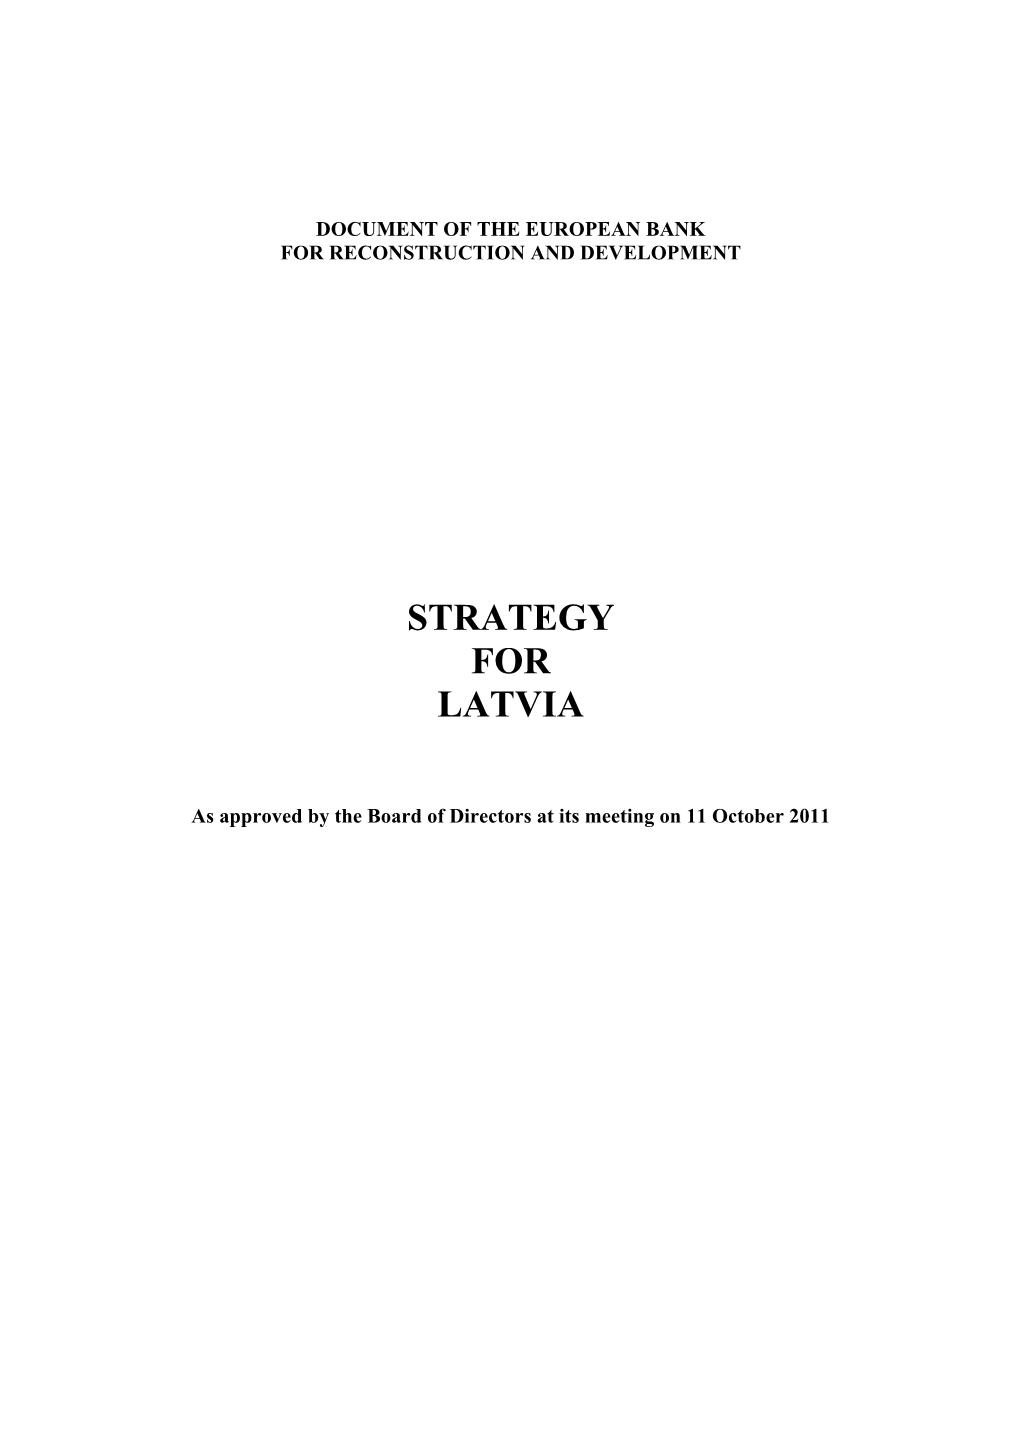 Country Strategy for Latvia [EBRD